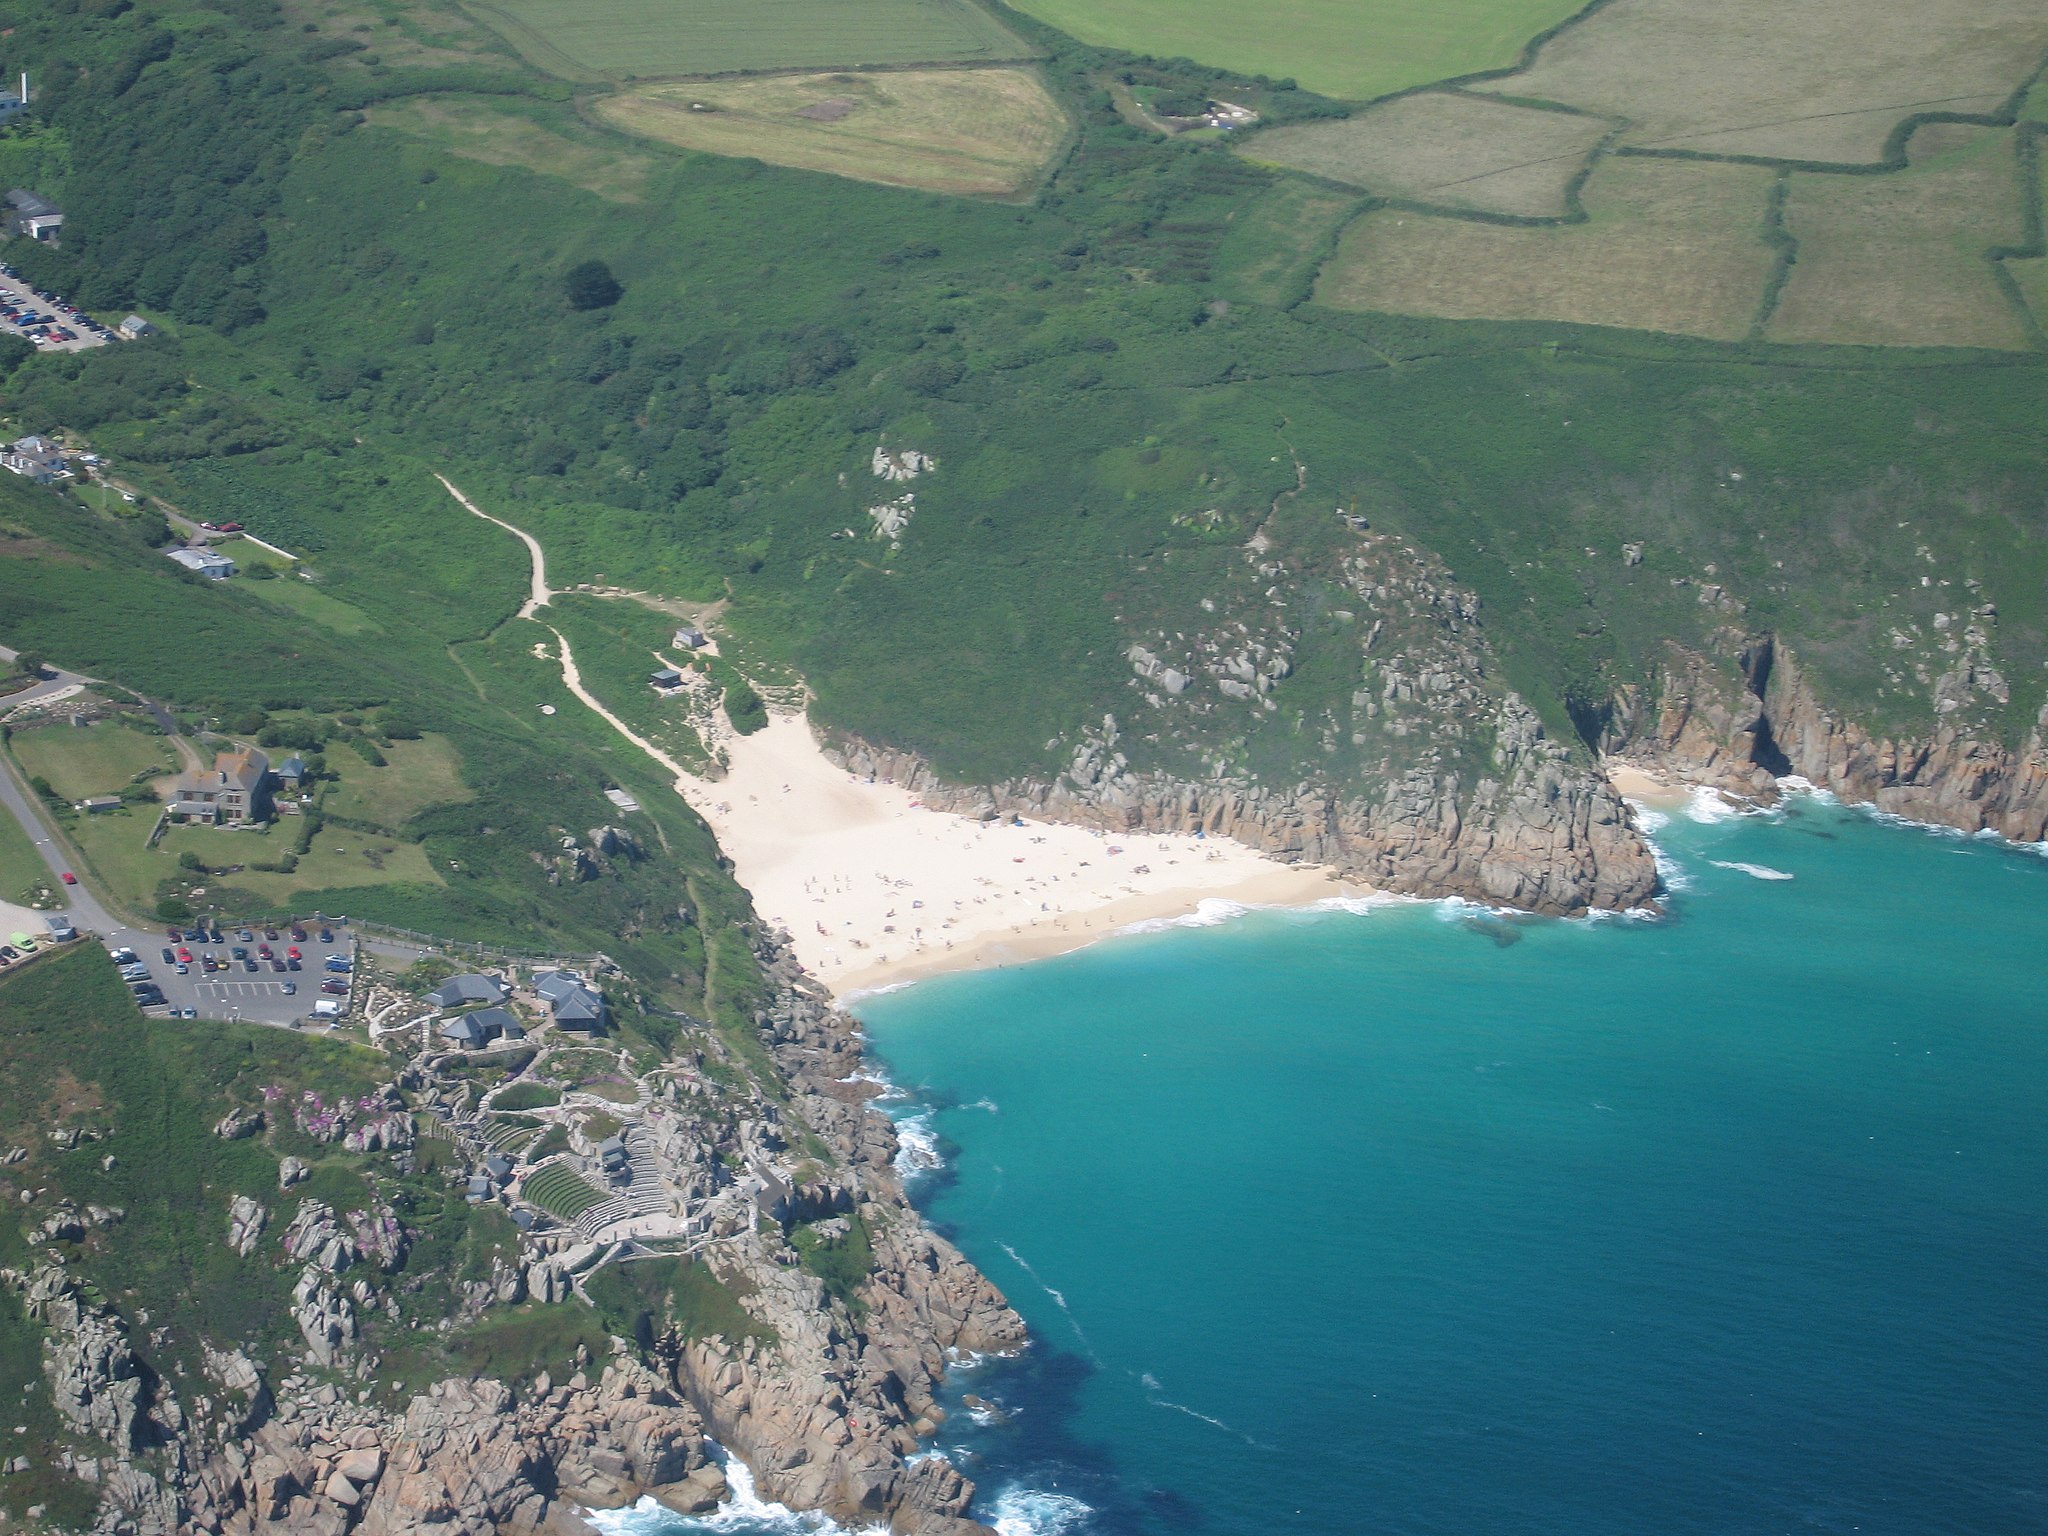 Porthcurno in Cornwall from above